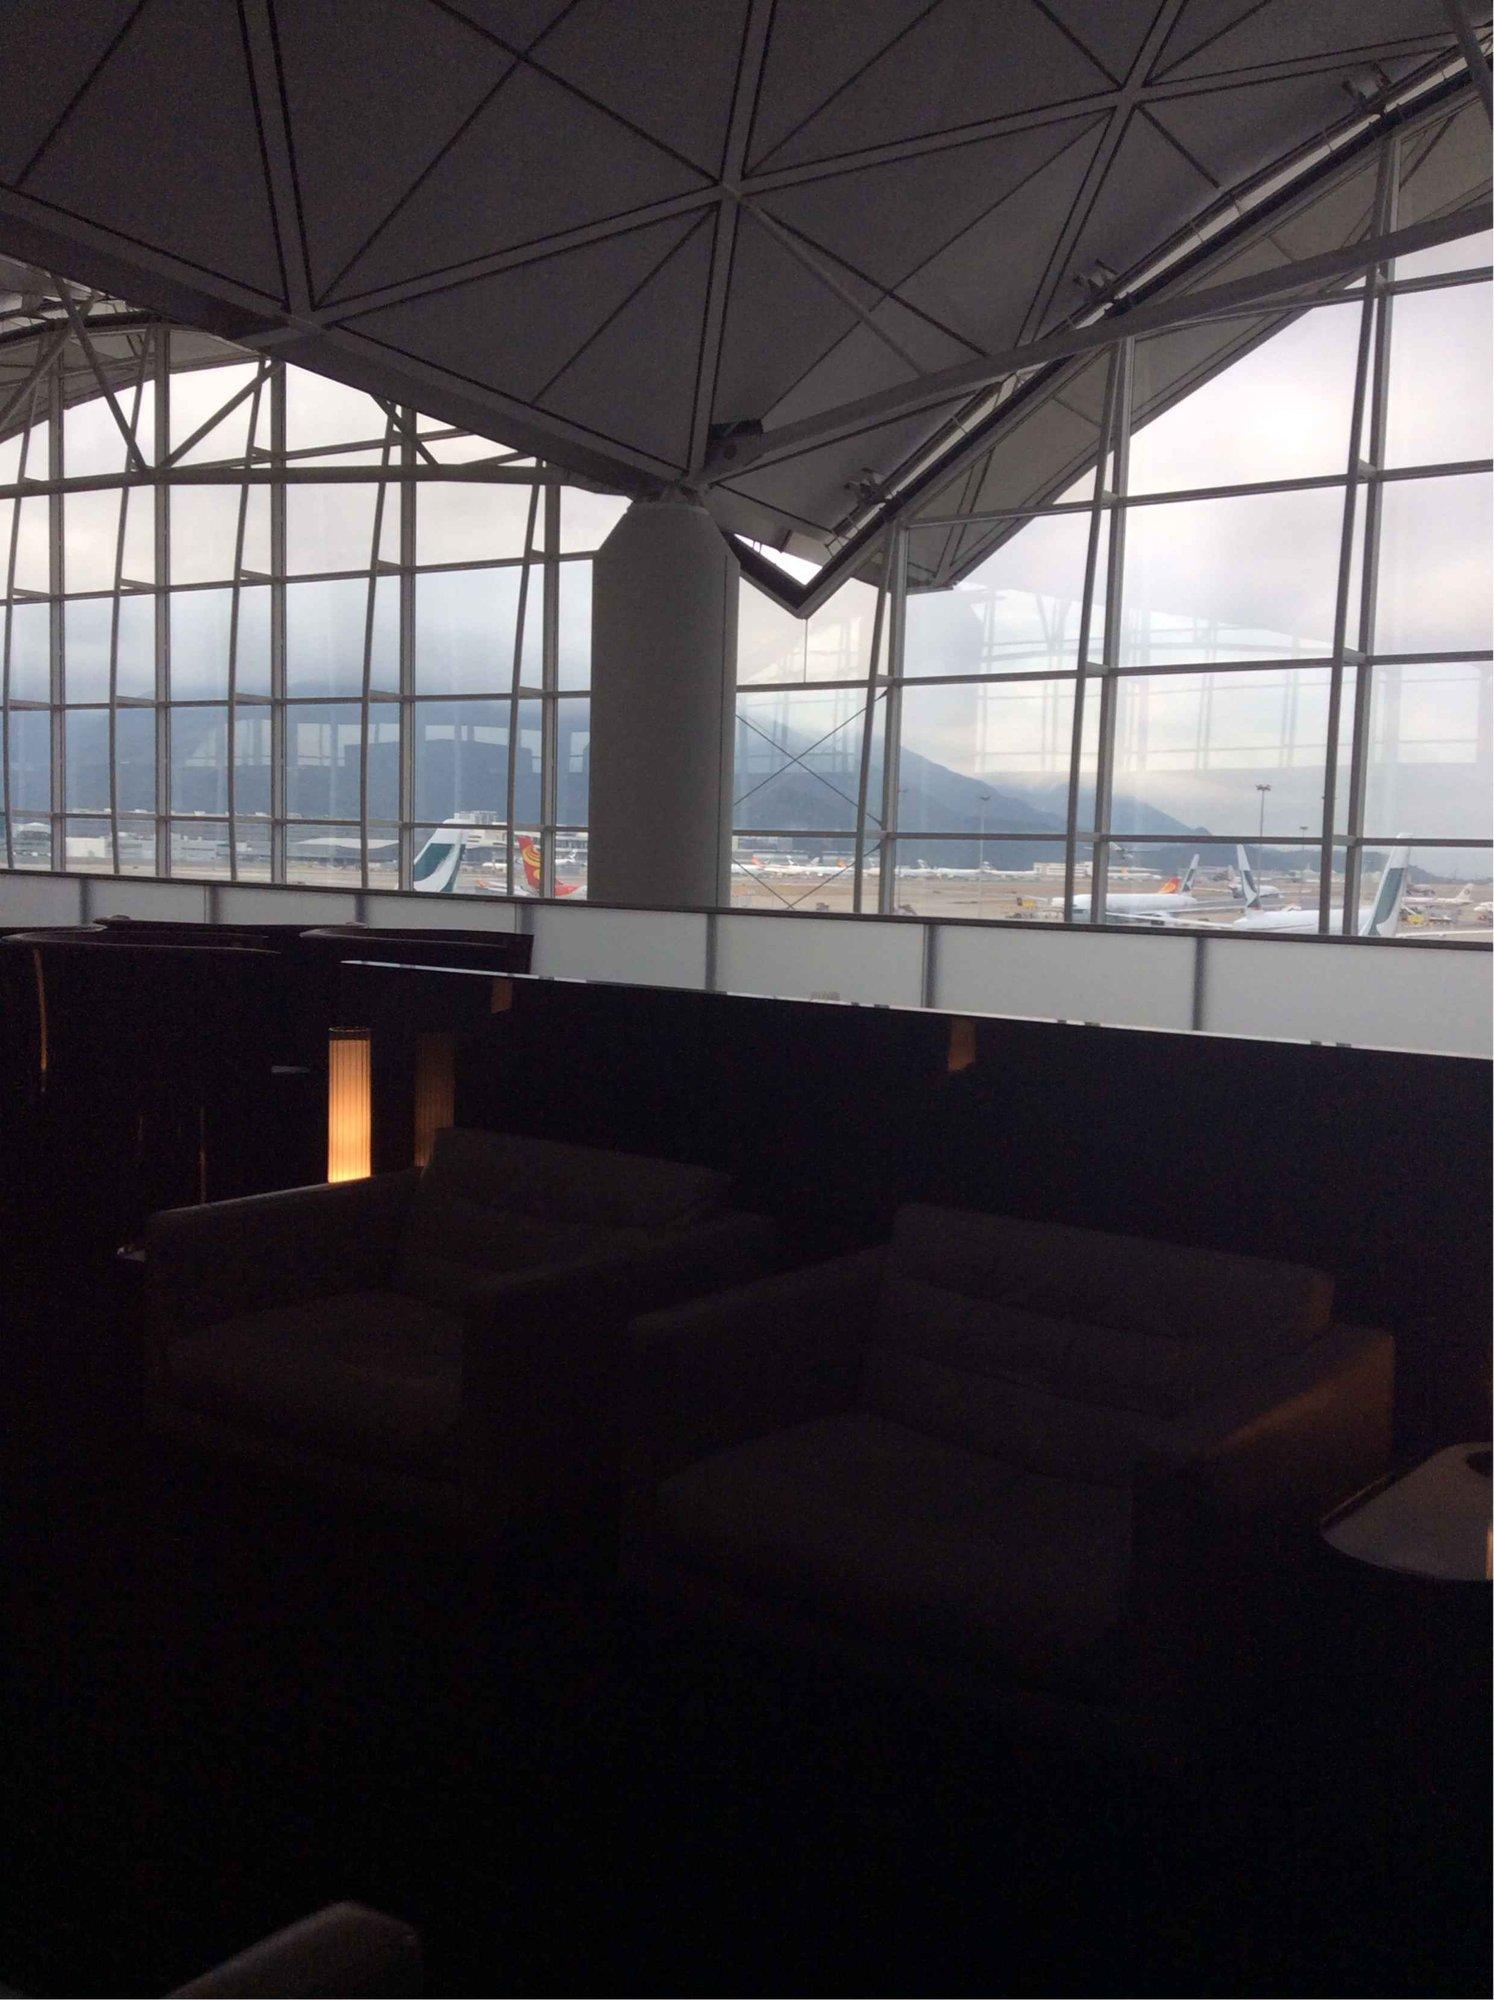 Cathay Pacific The Wing First Class Lounge image 62 of 89